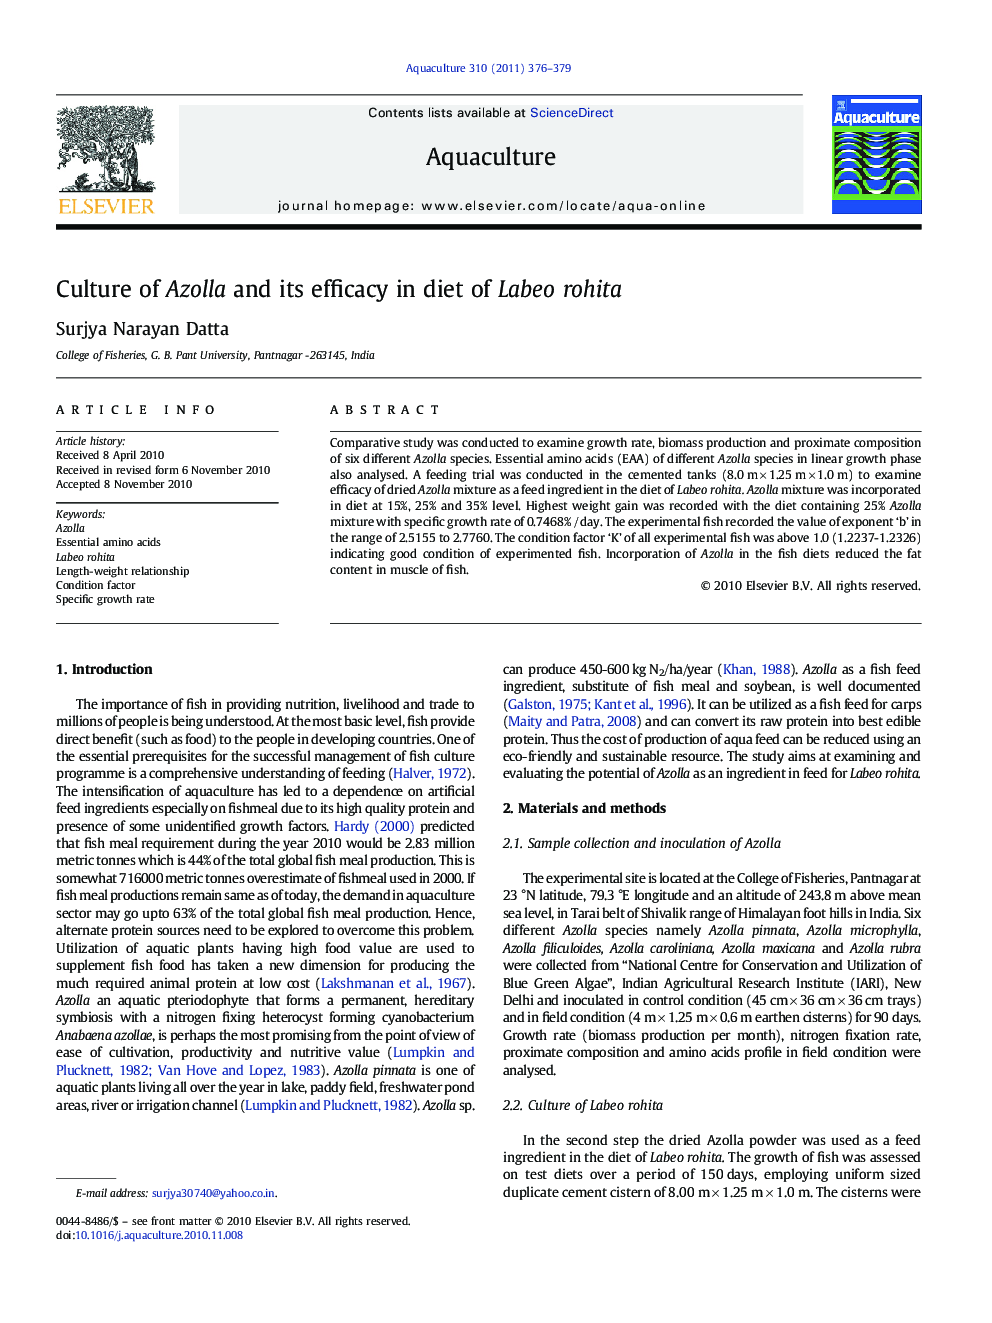 Culture of Azolla and its efficacy in diet of Labeo rohita